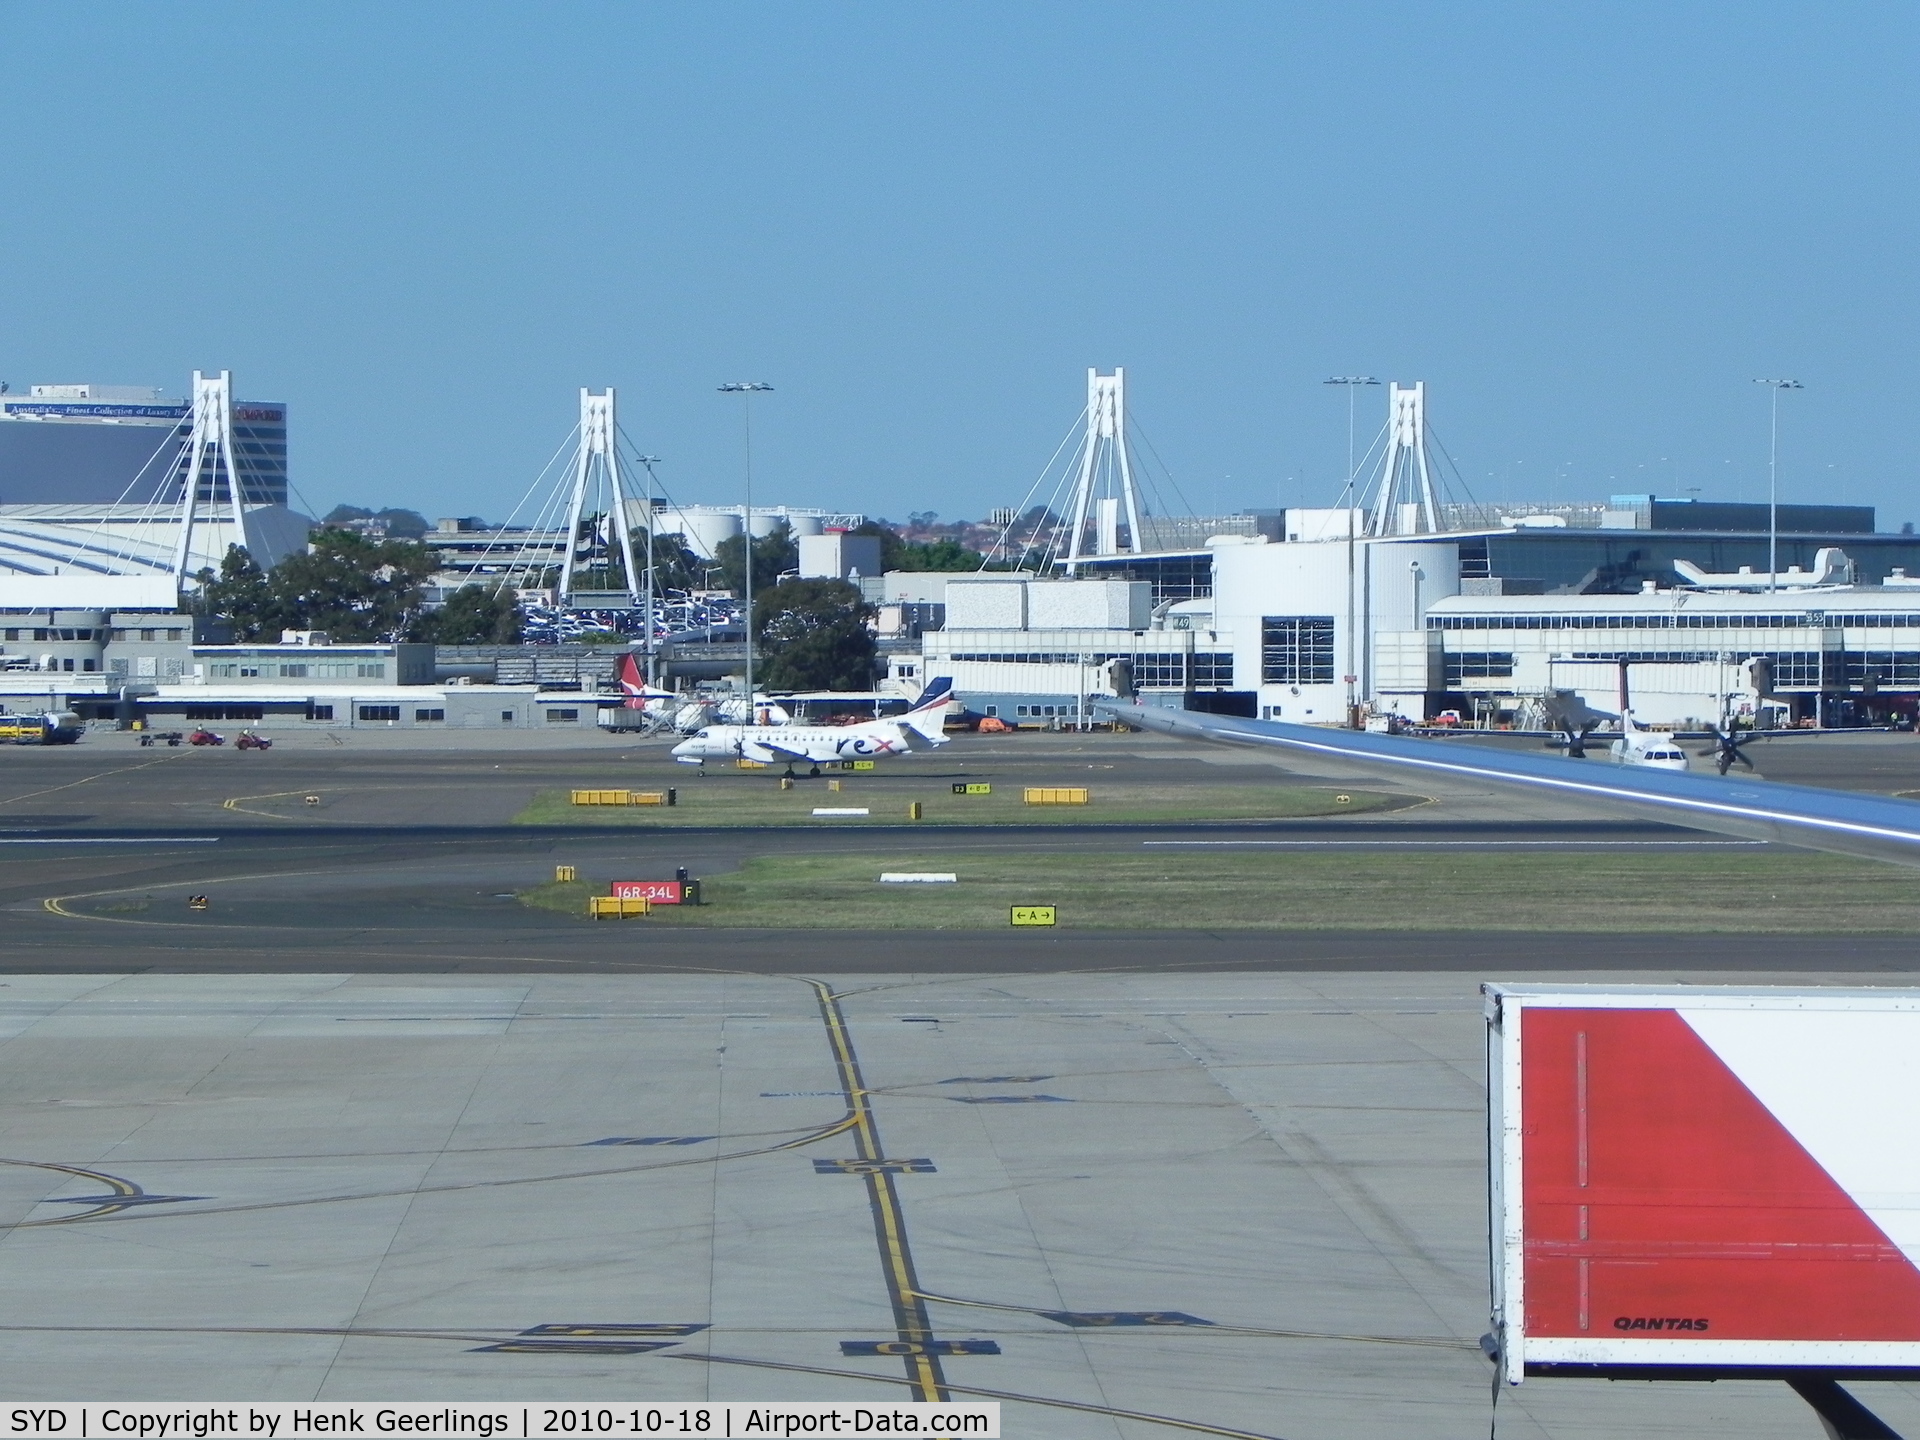 Sydney Airport, Mascot, New South Wales Australia (SYD) - Domestic Terminal , seen fron Int'l Building